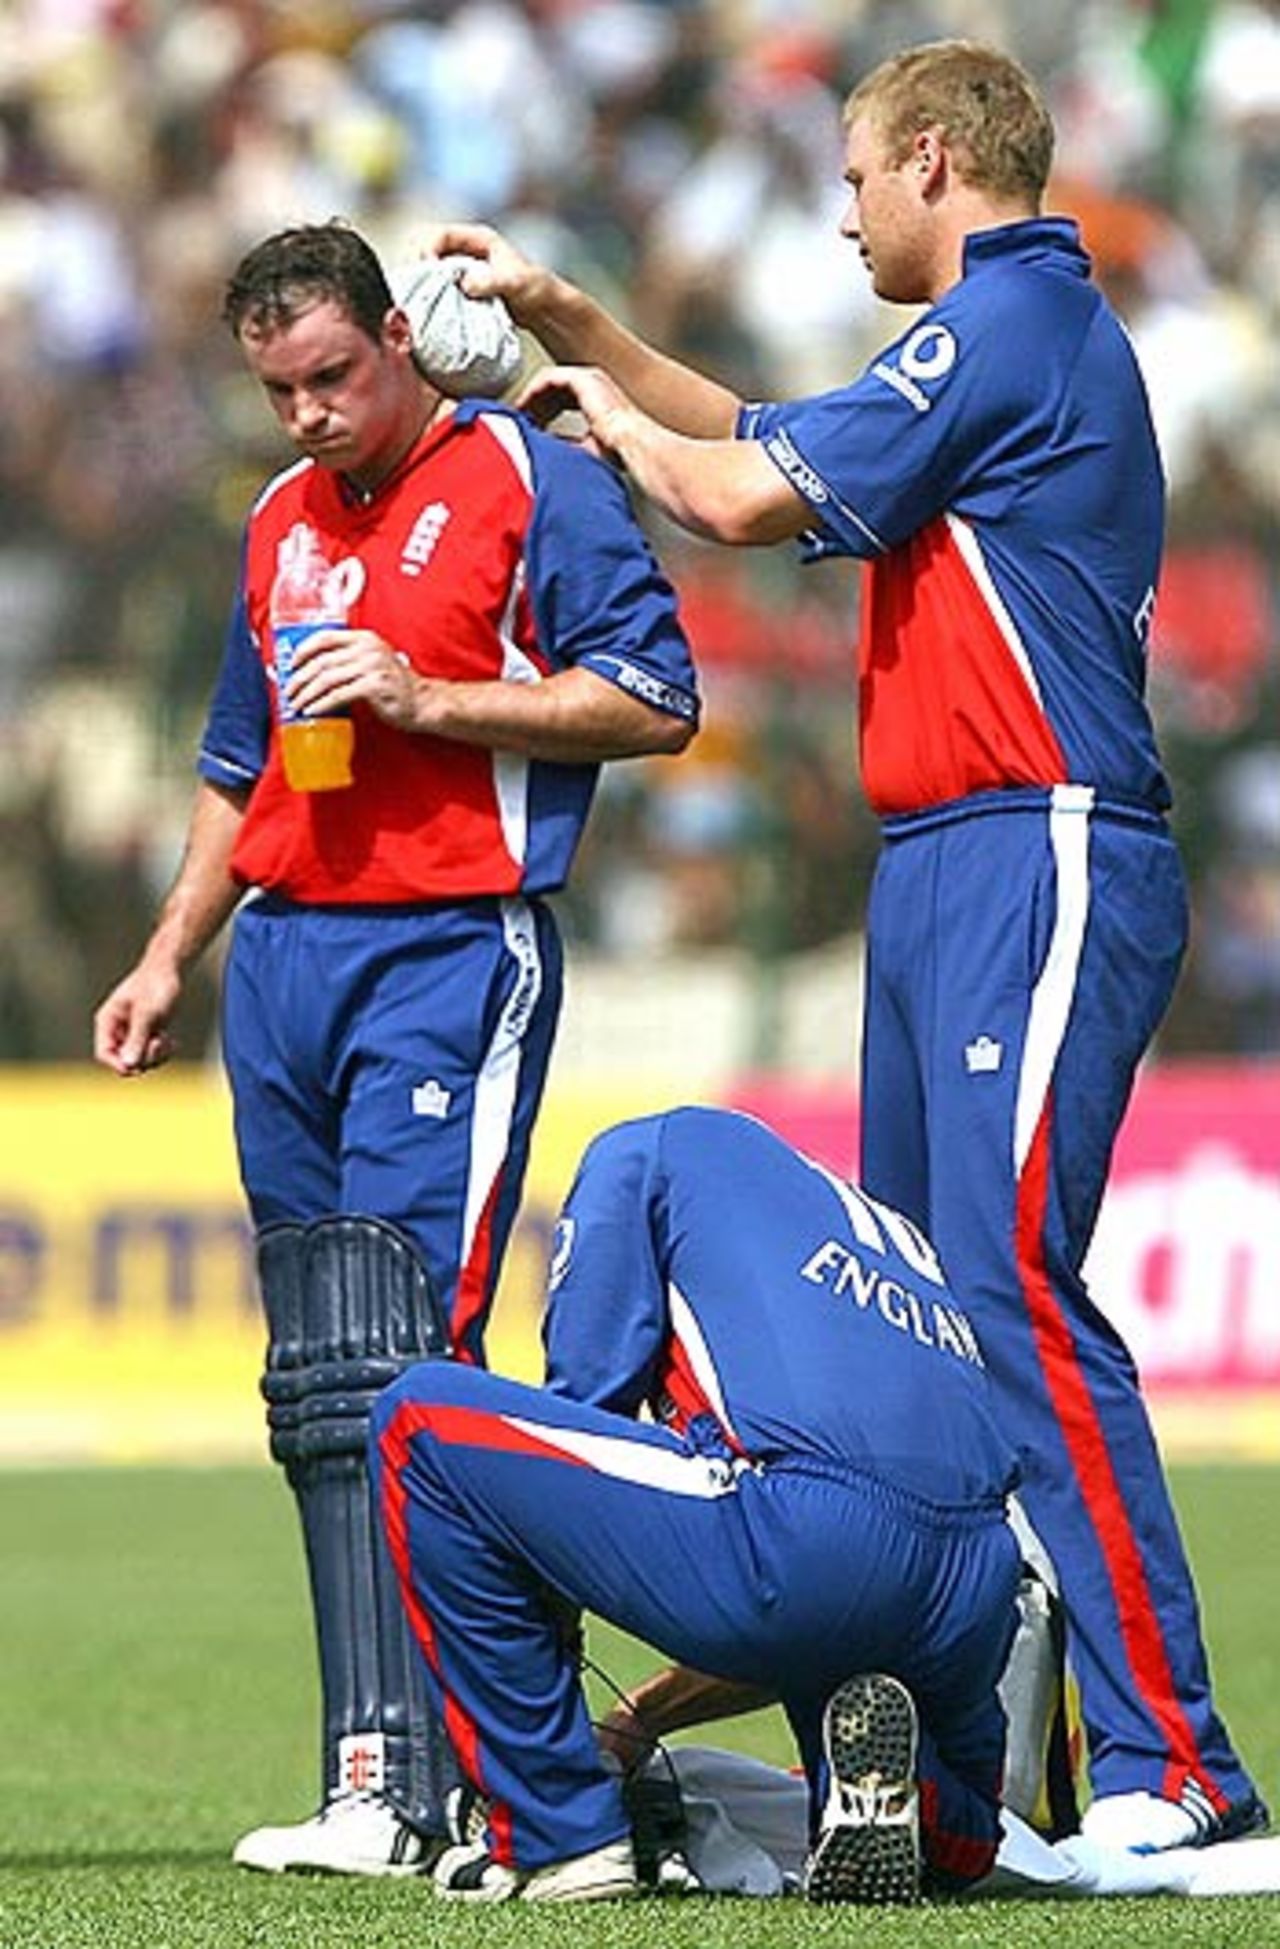 Andrew Strauss had to retire because of cramps after scoring 74, India v England, 6th ODI, Jamshedpur, April 12, 2006